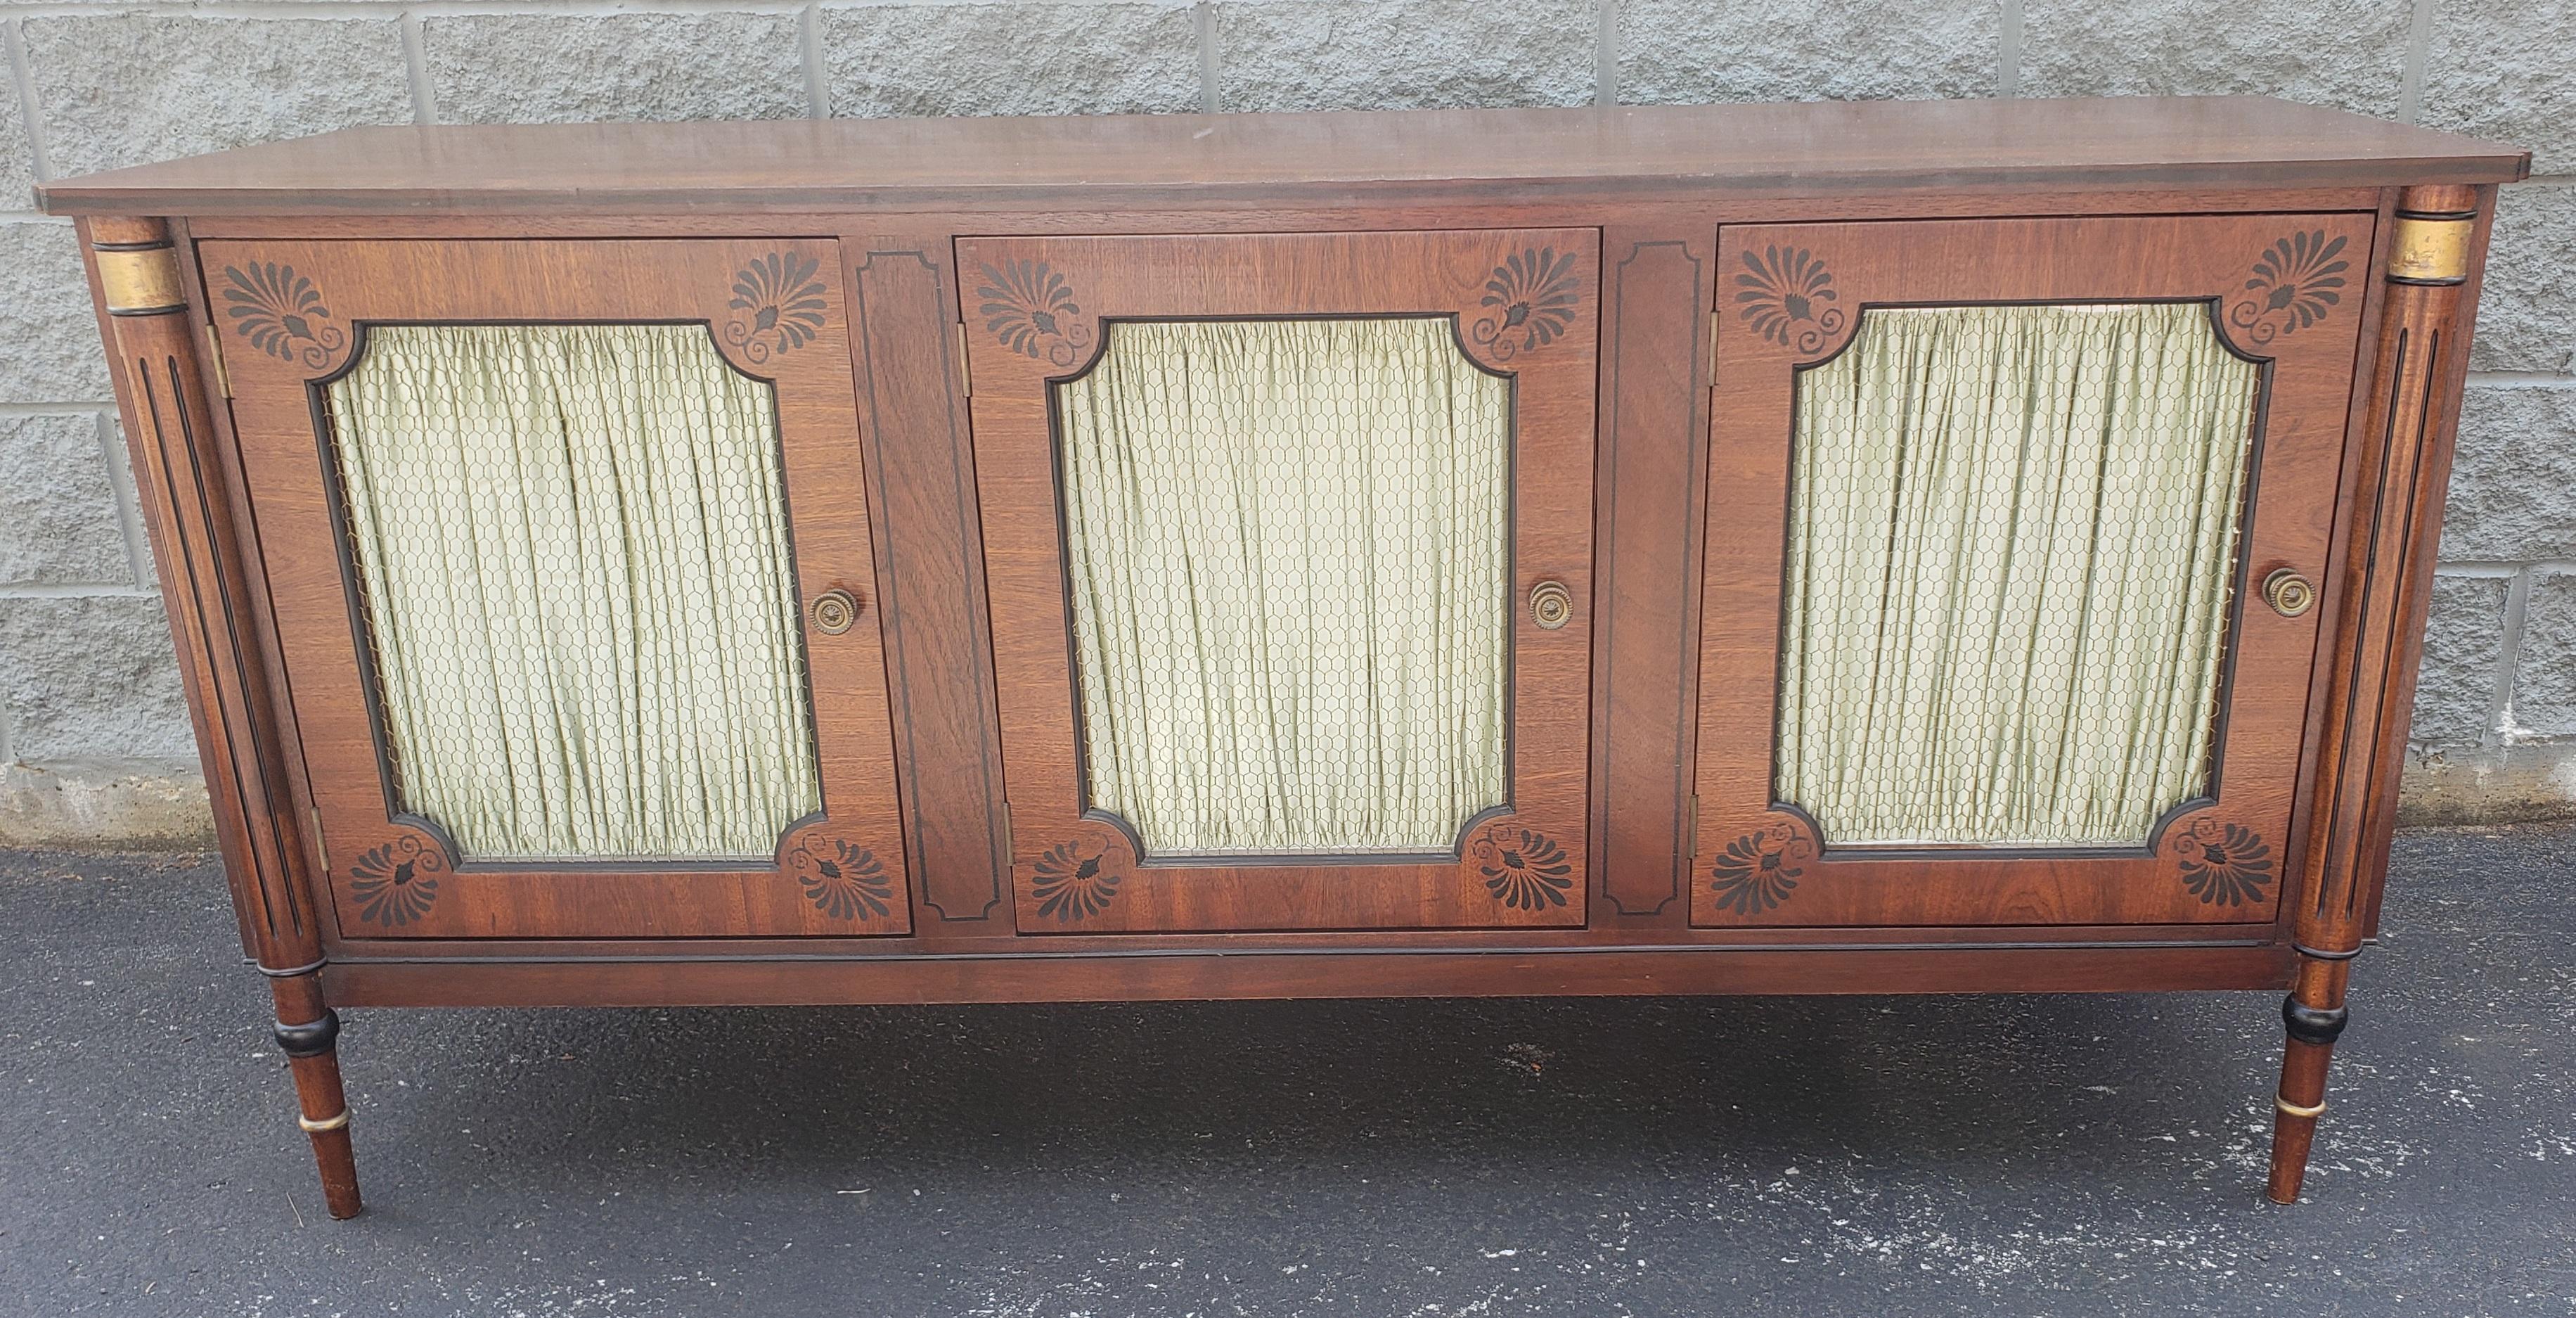 A custom Nicholas James Mid-Century English neoclassical Walnut Side board / Buffet / credenza with Curtains and wire Mesh Doors in good vintage condition.Features three large compartments that open to reveal three drawers fully felt lined to